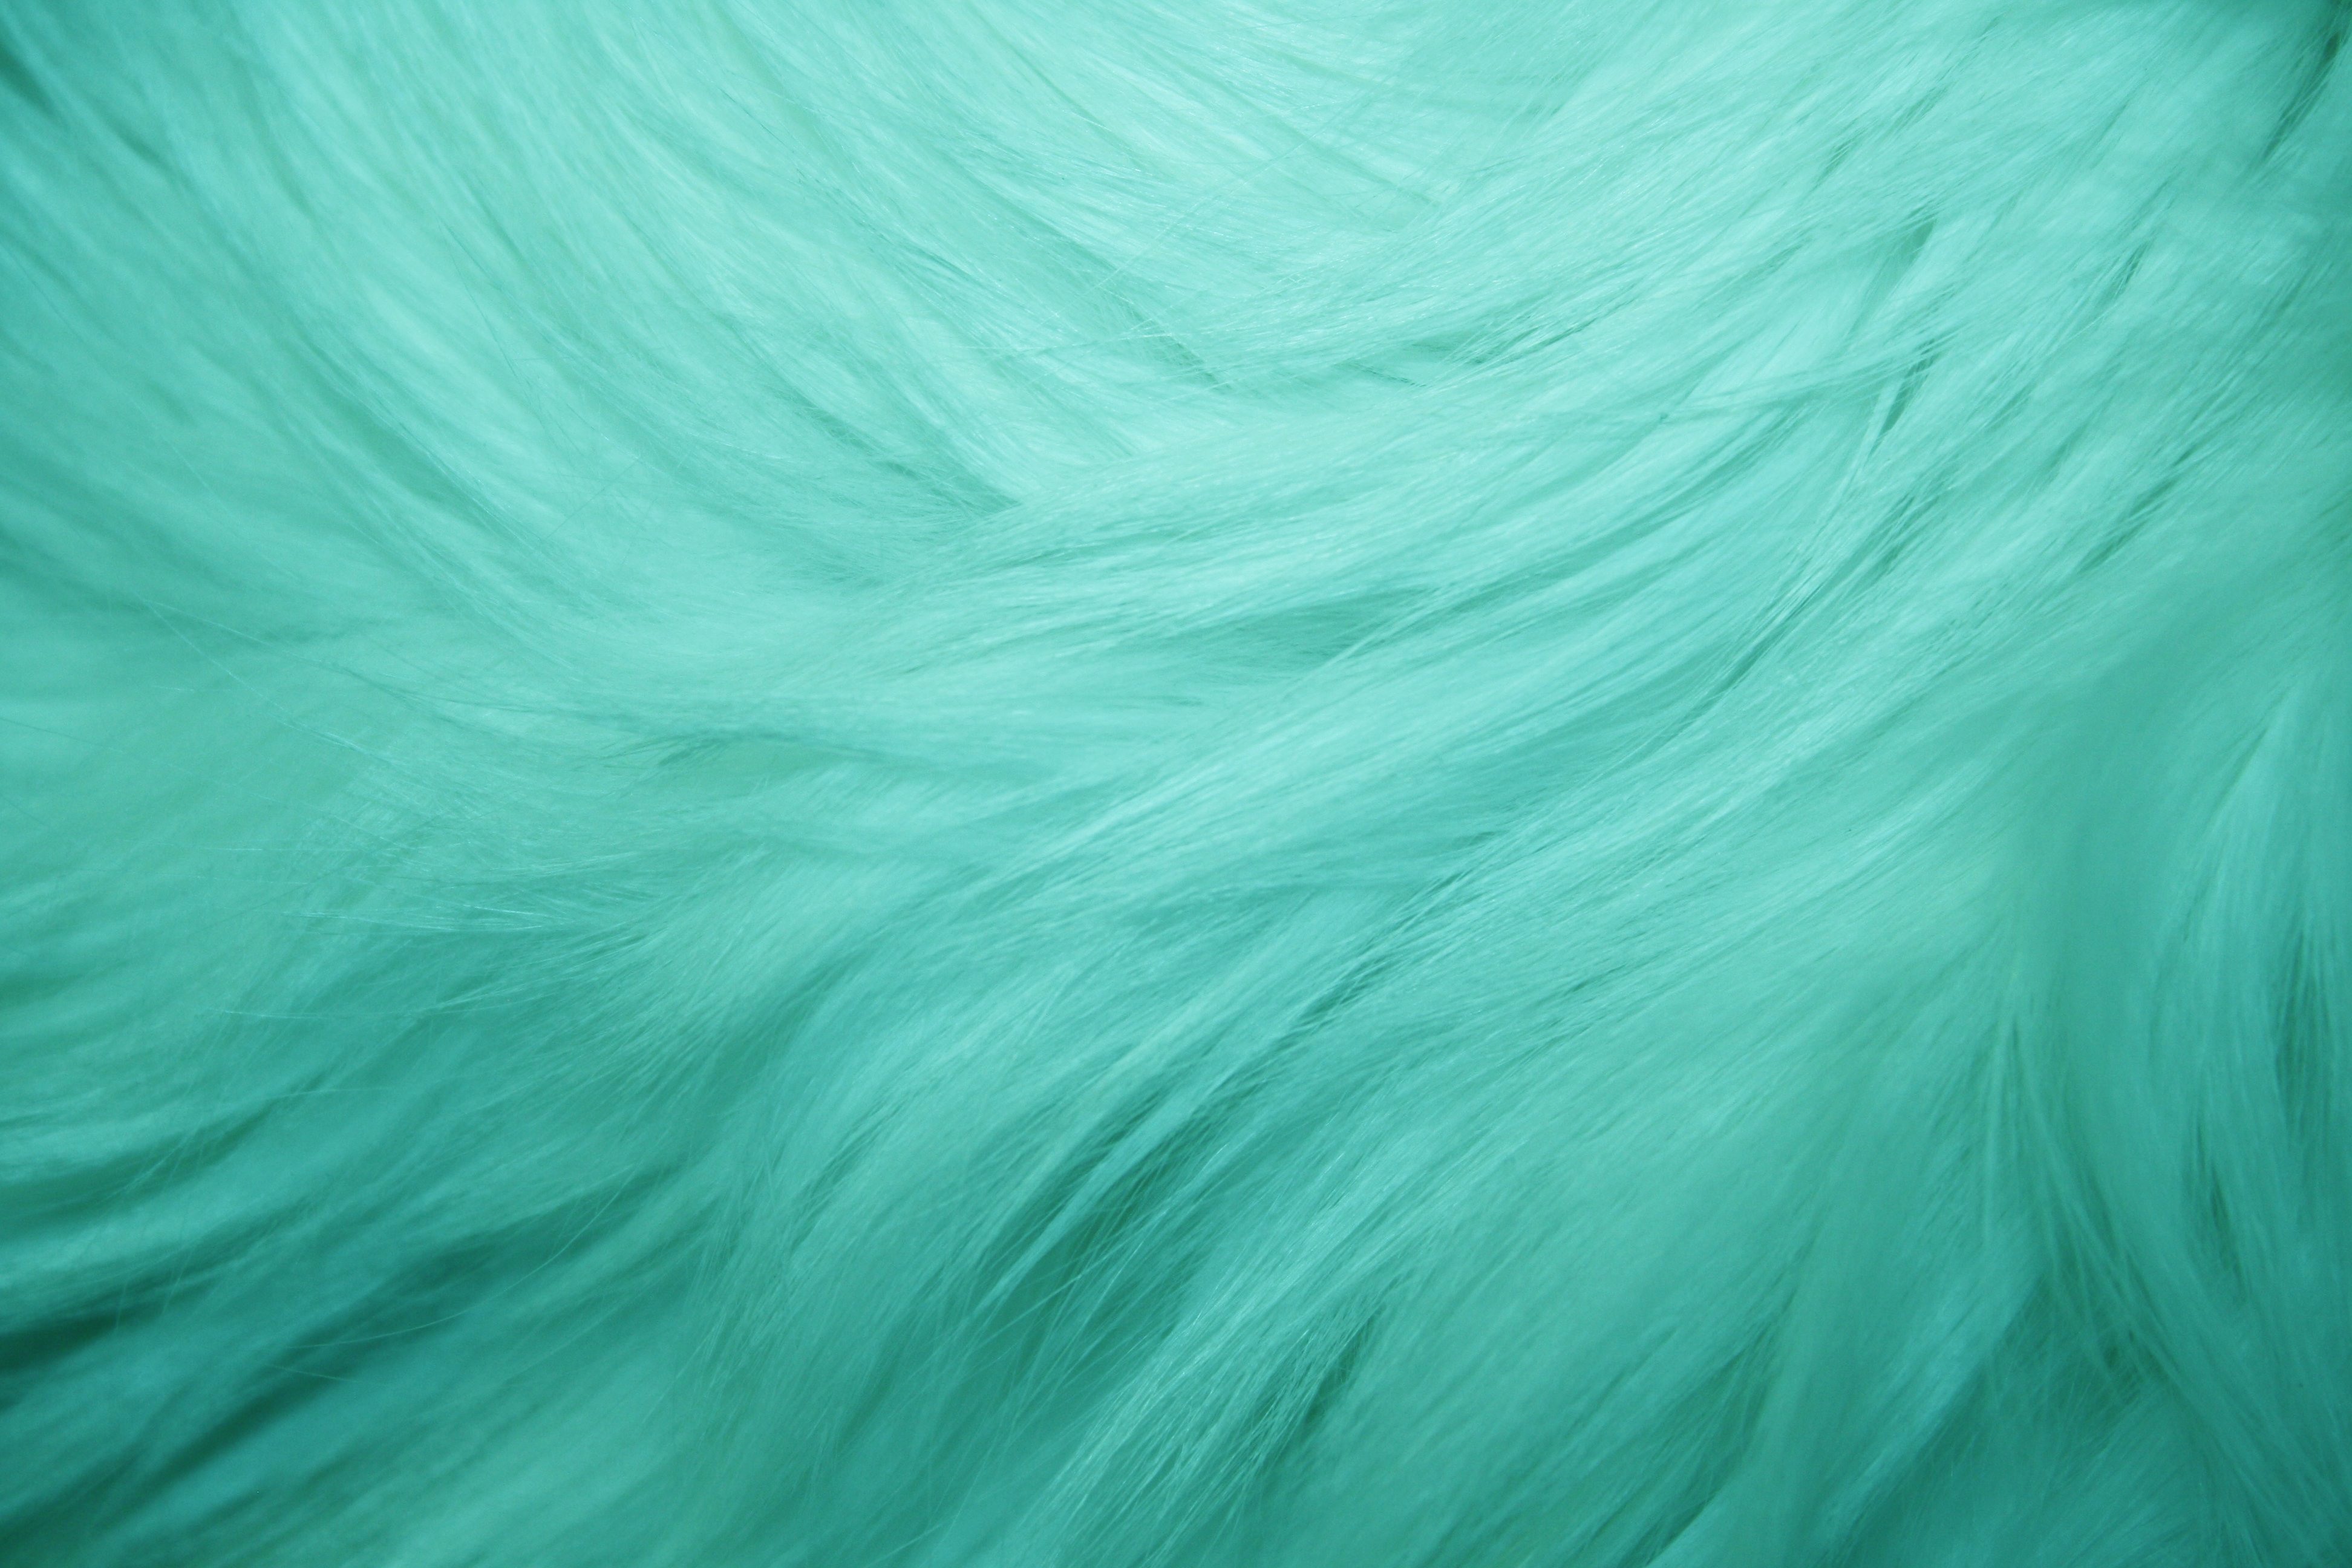 Teal Fur Texture Free High Resolution Photo Dimensions